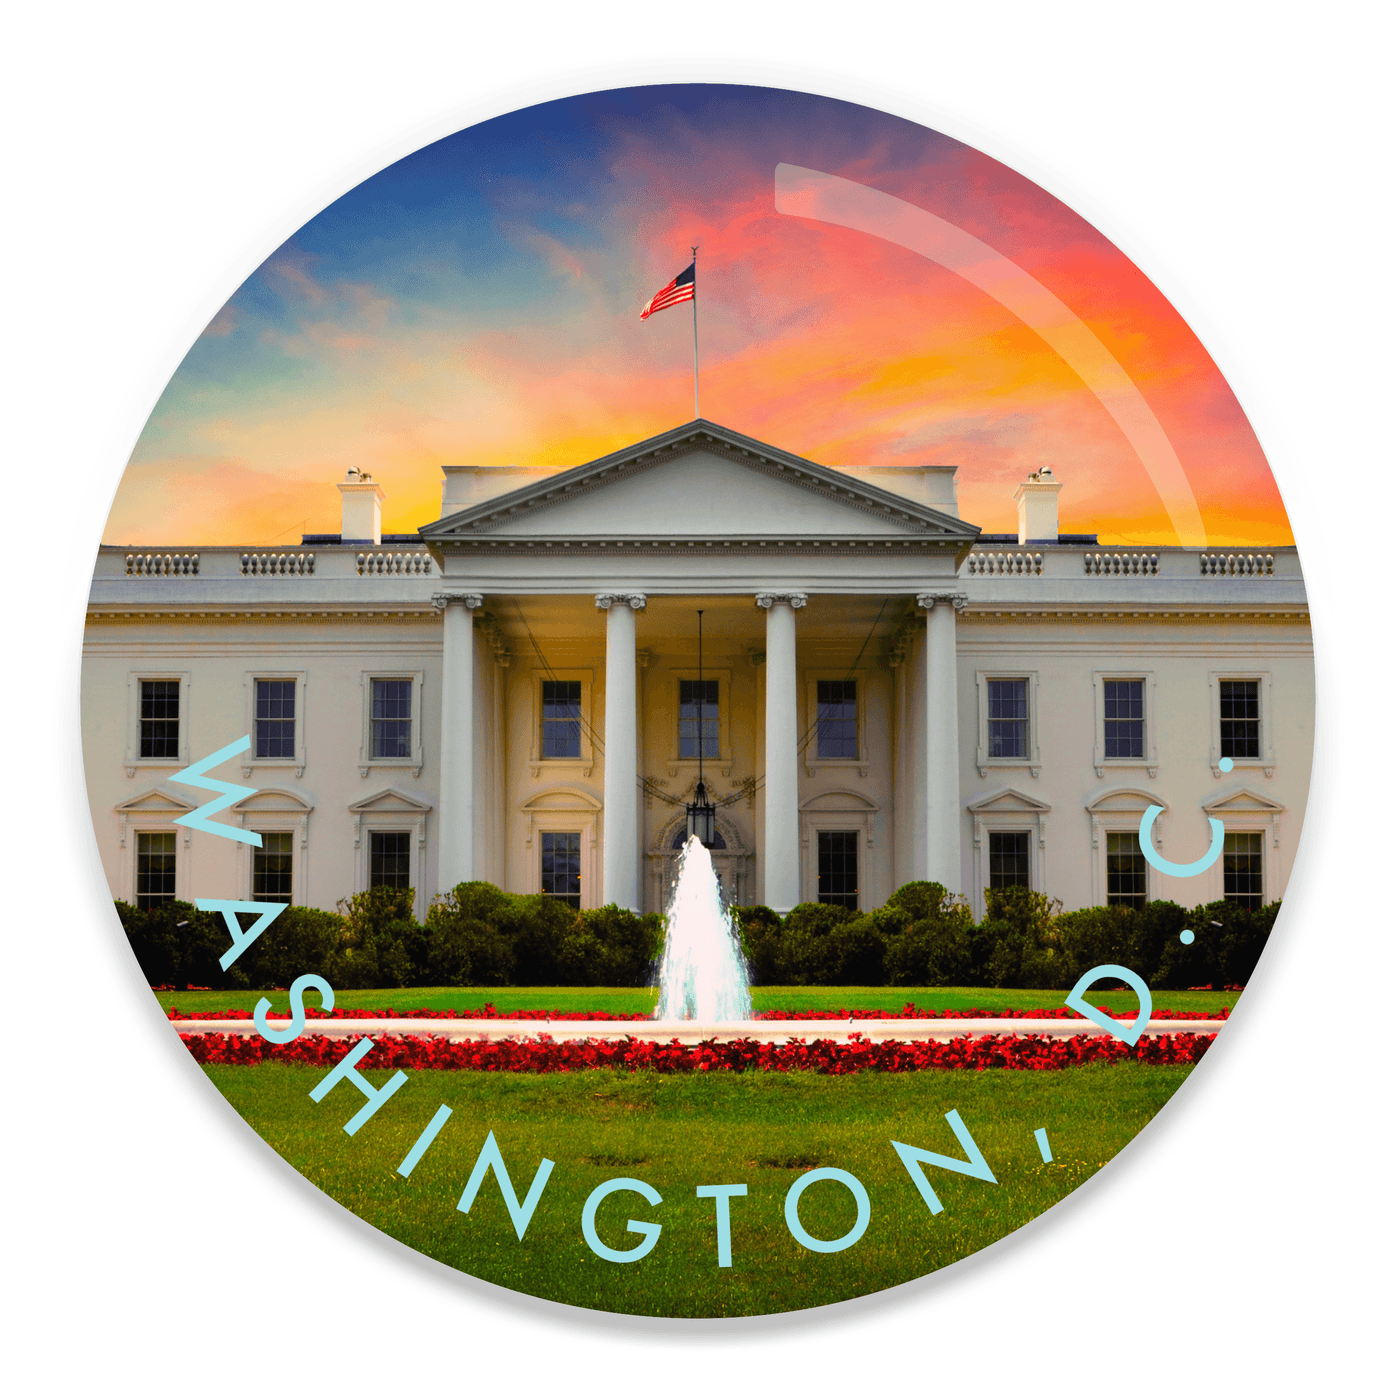 2.25 inch round colorful magnet with image of the white house